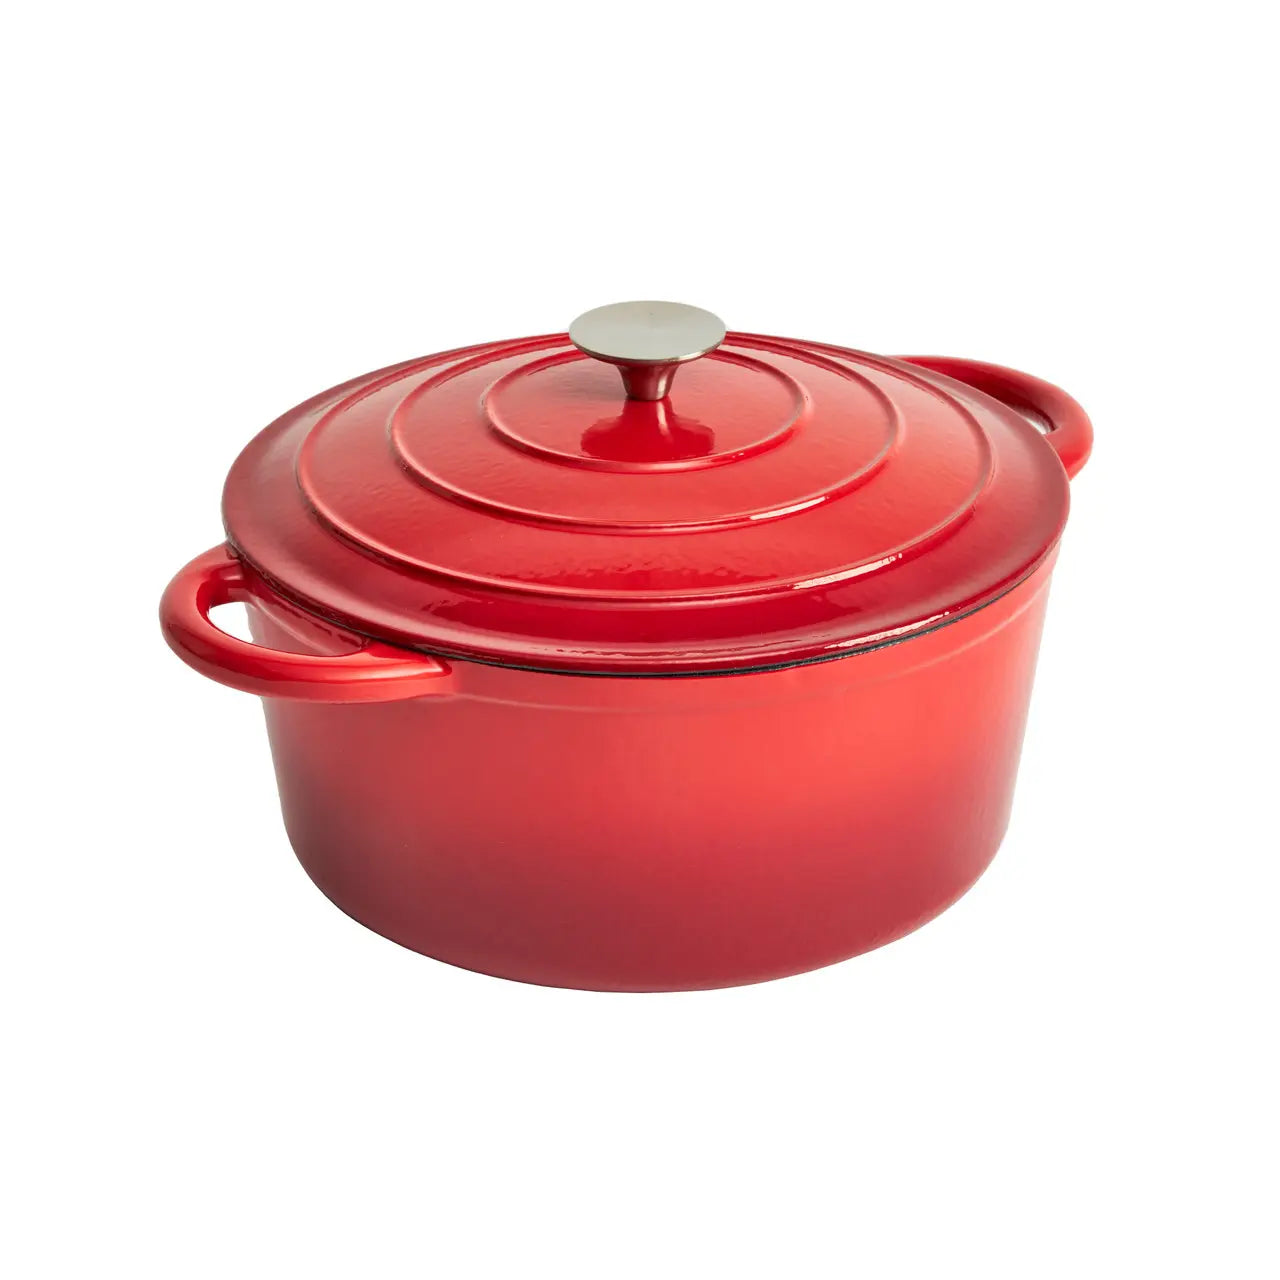 Enameled Cast Iron 9.5 inch Round Dutch Oven in Red